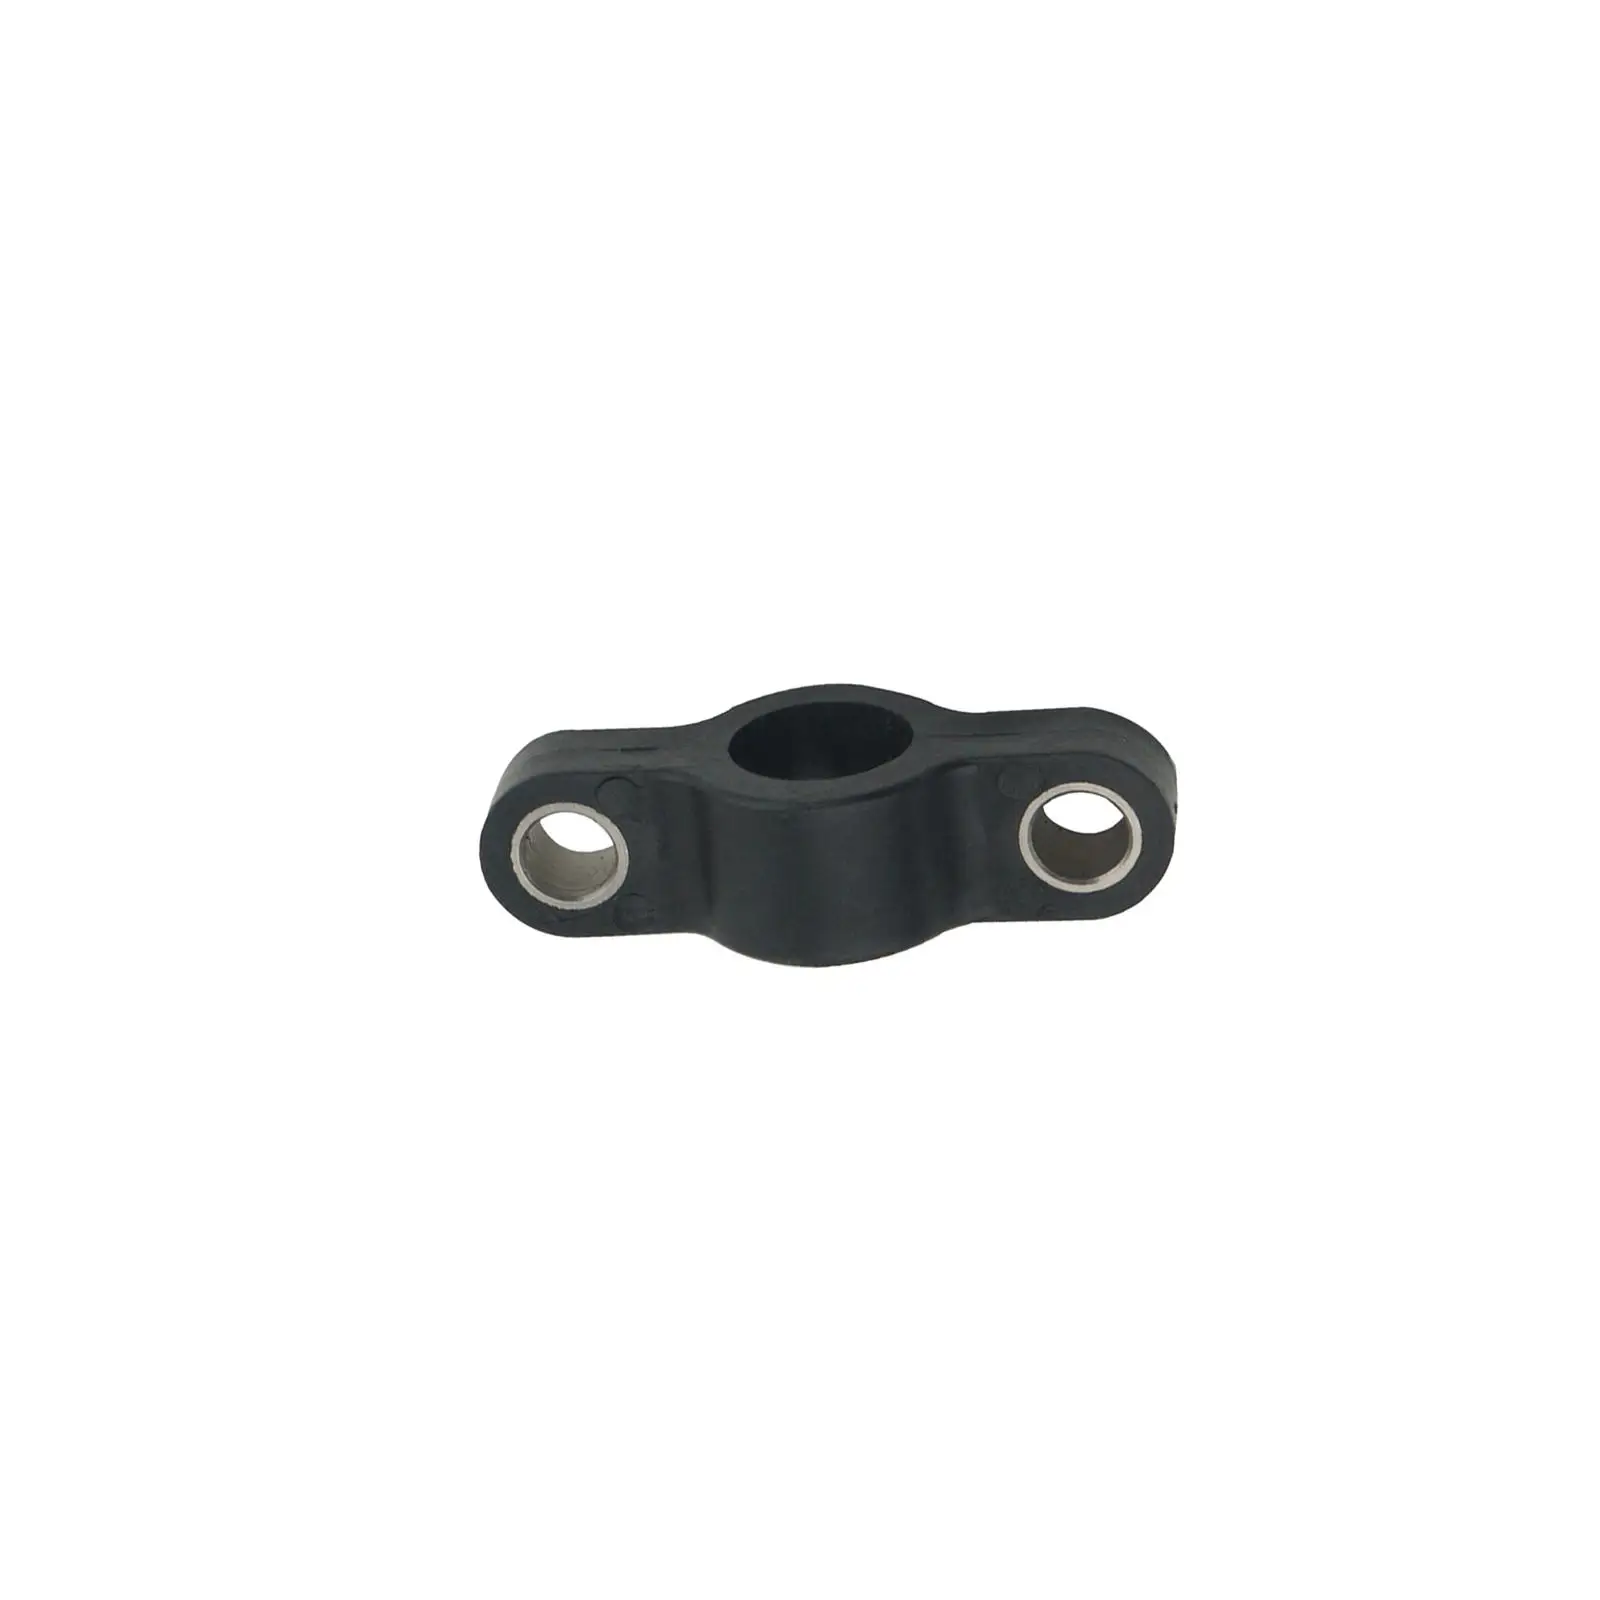 Nylon Bracket 6F5-41662 for Yamaha Outboard Motor Replacement Black Vehicle Repair Parts Convenient Installation